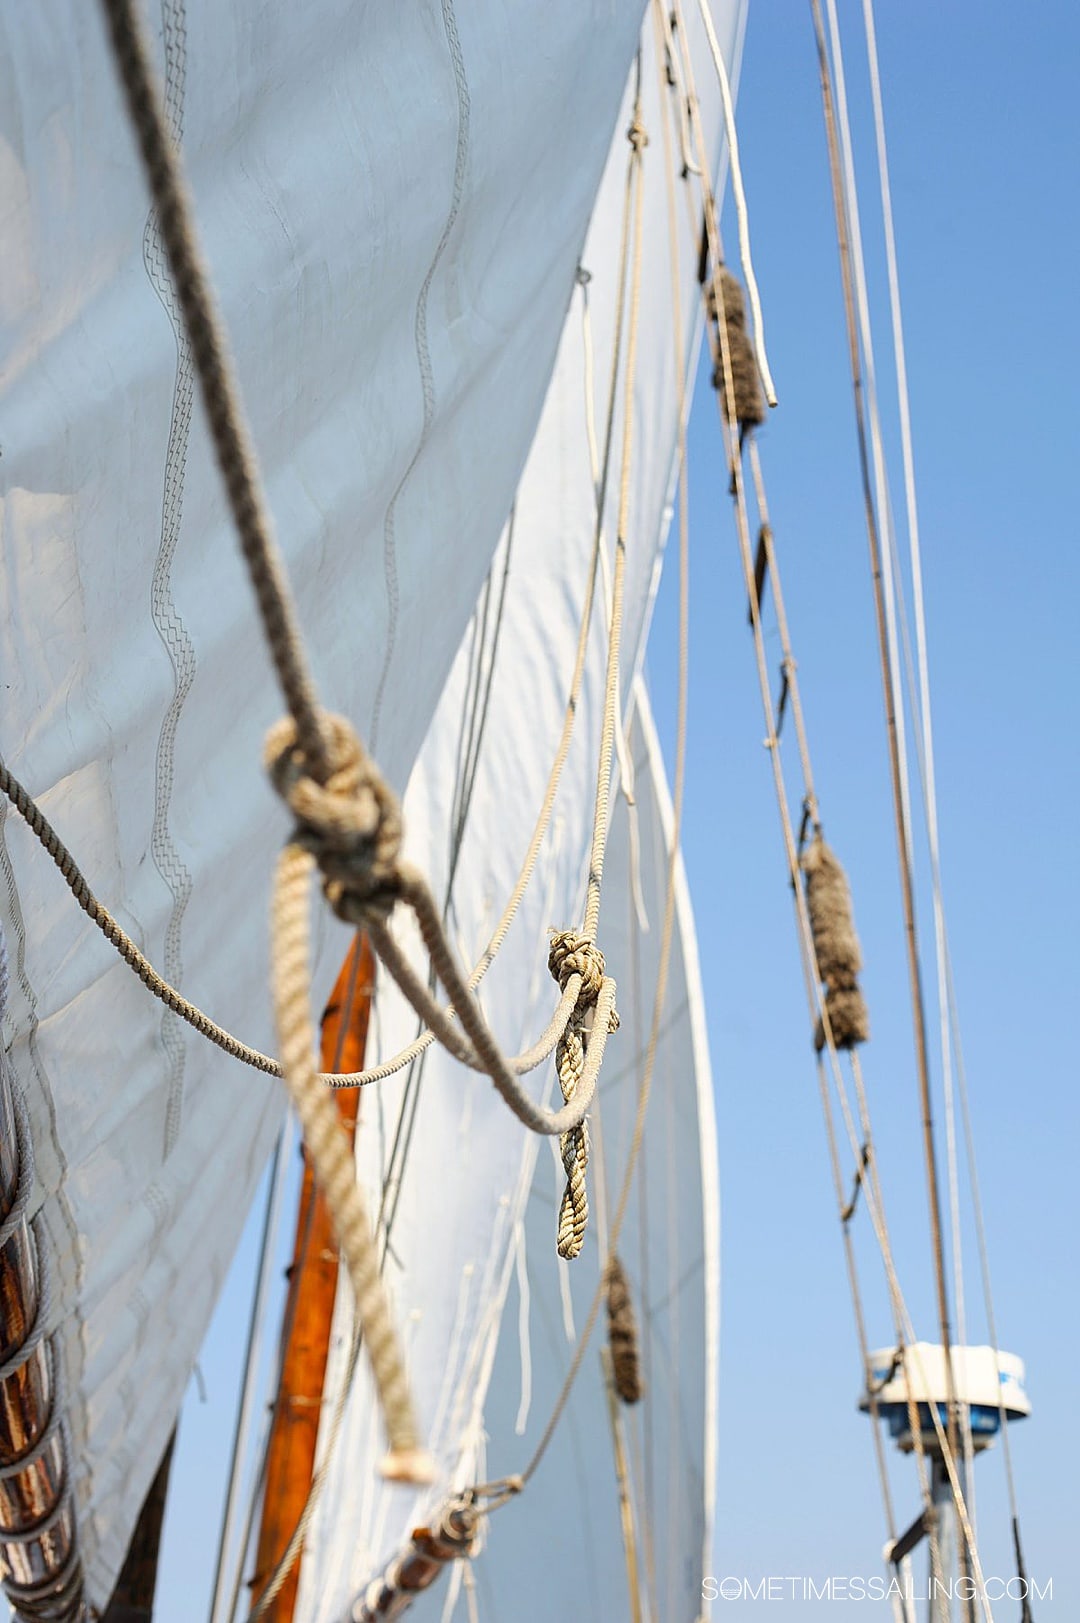 Cruise ship terms you need to know. Sails and lines on a sailboat.